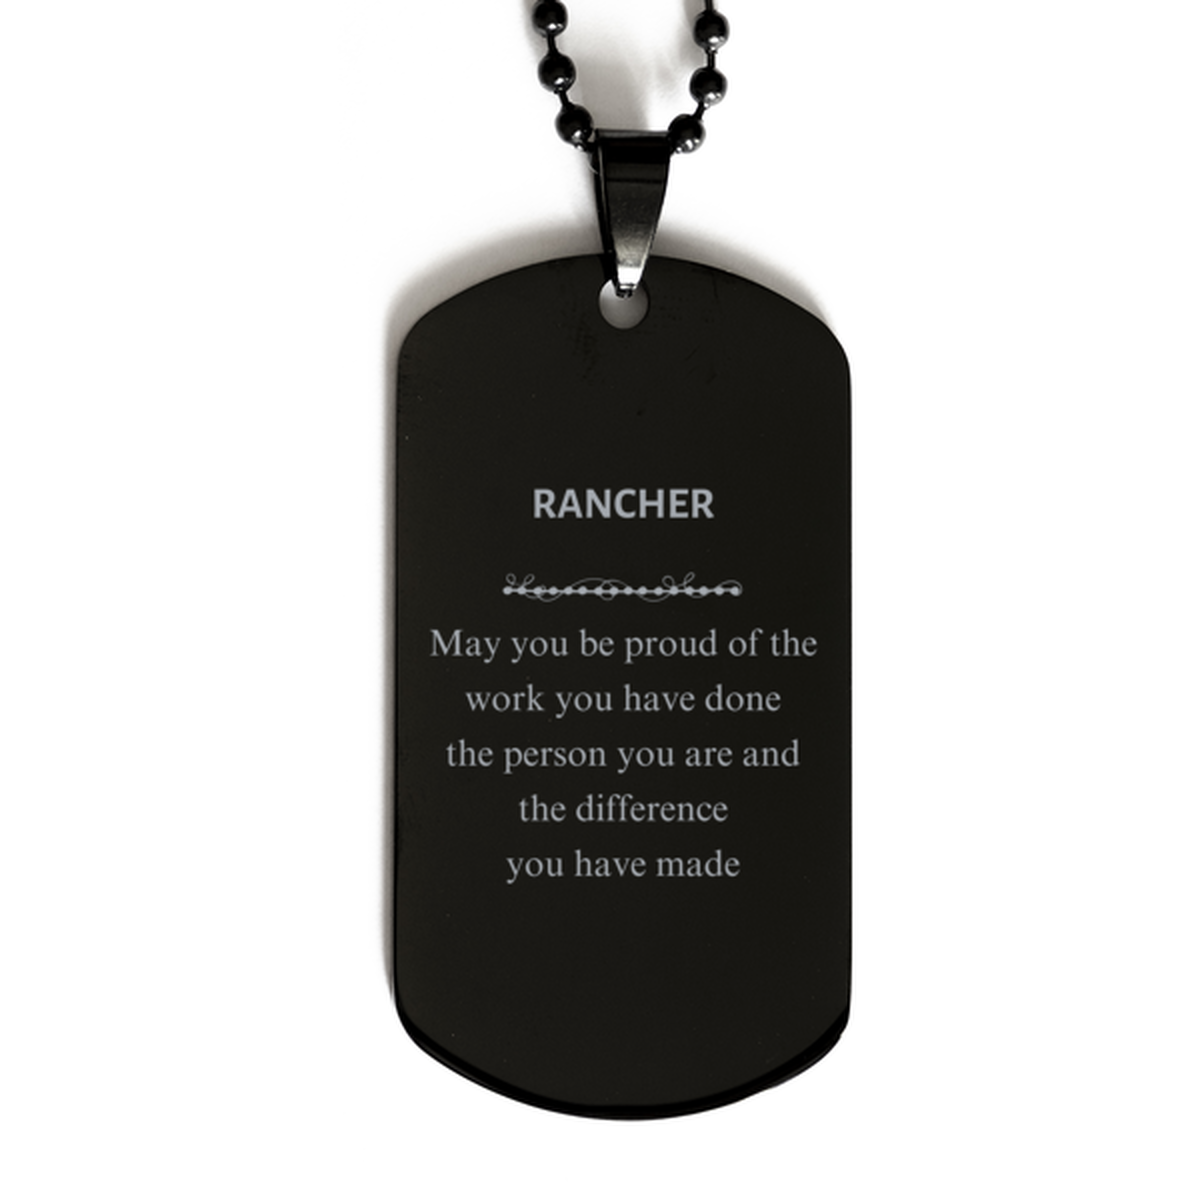 Rancher May you be proud of the work you have done, Retirement Rancher Black Dog Tag for Colleague Appreciation Gifts Amazing for Rancher